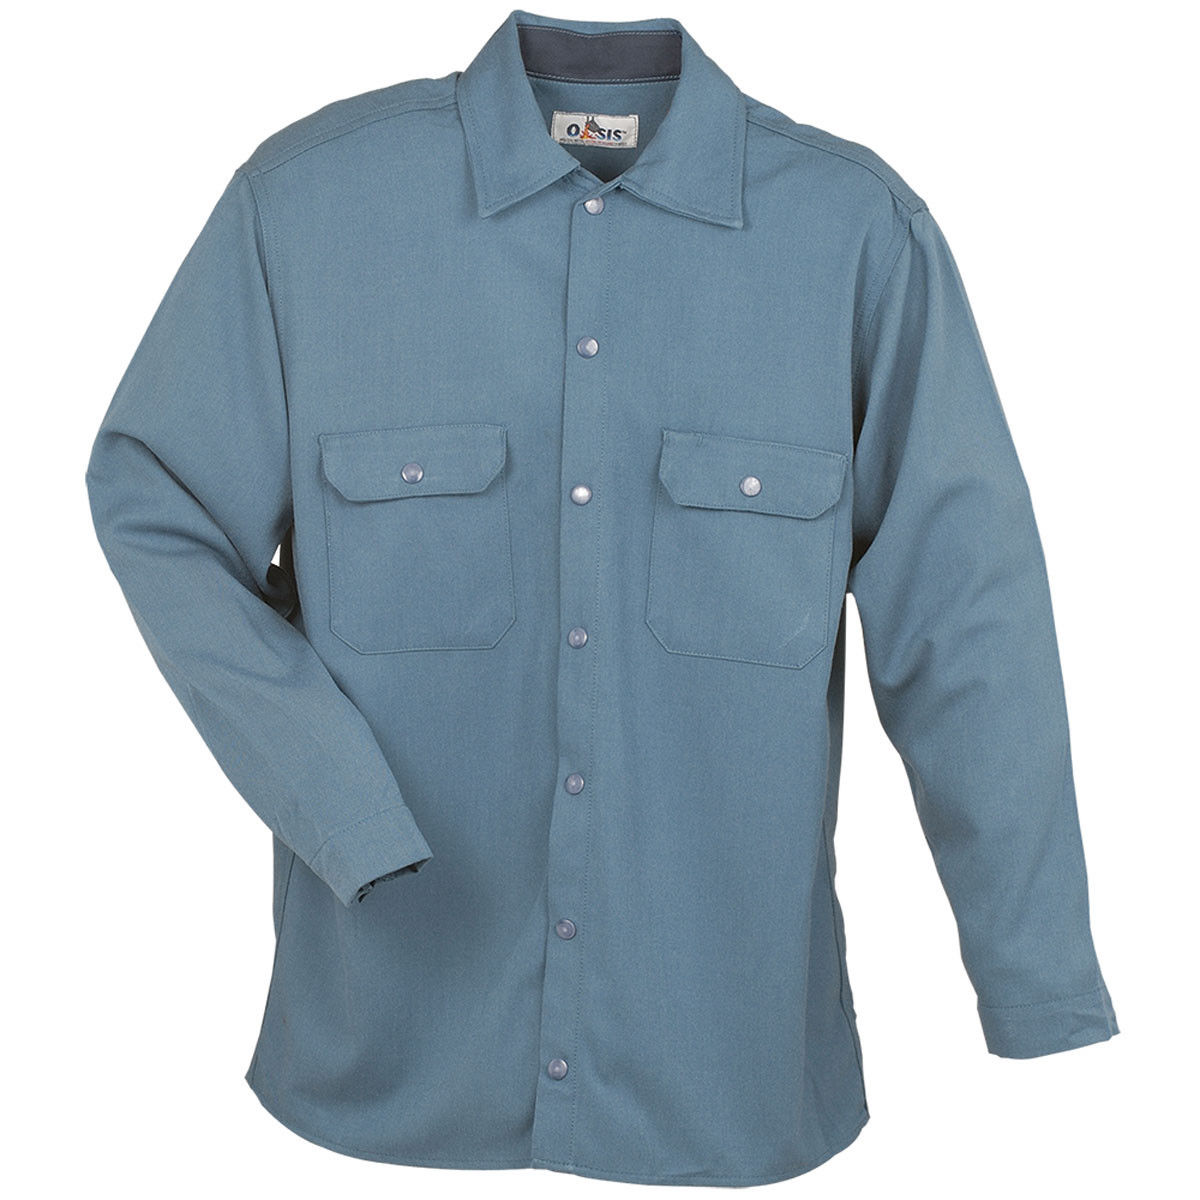 What is the flame resistance rating of these work shirts?